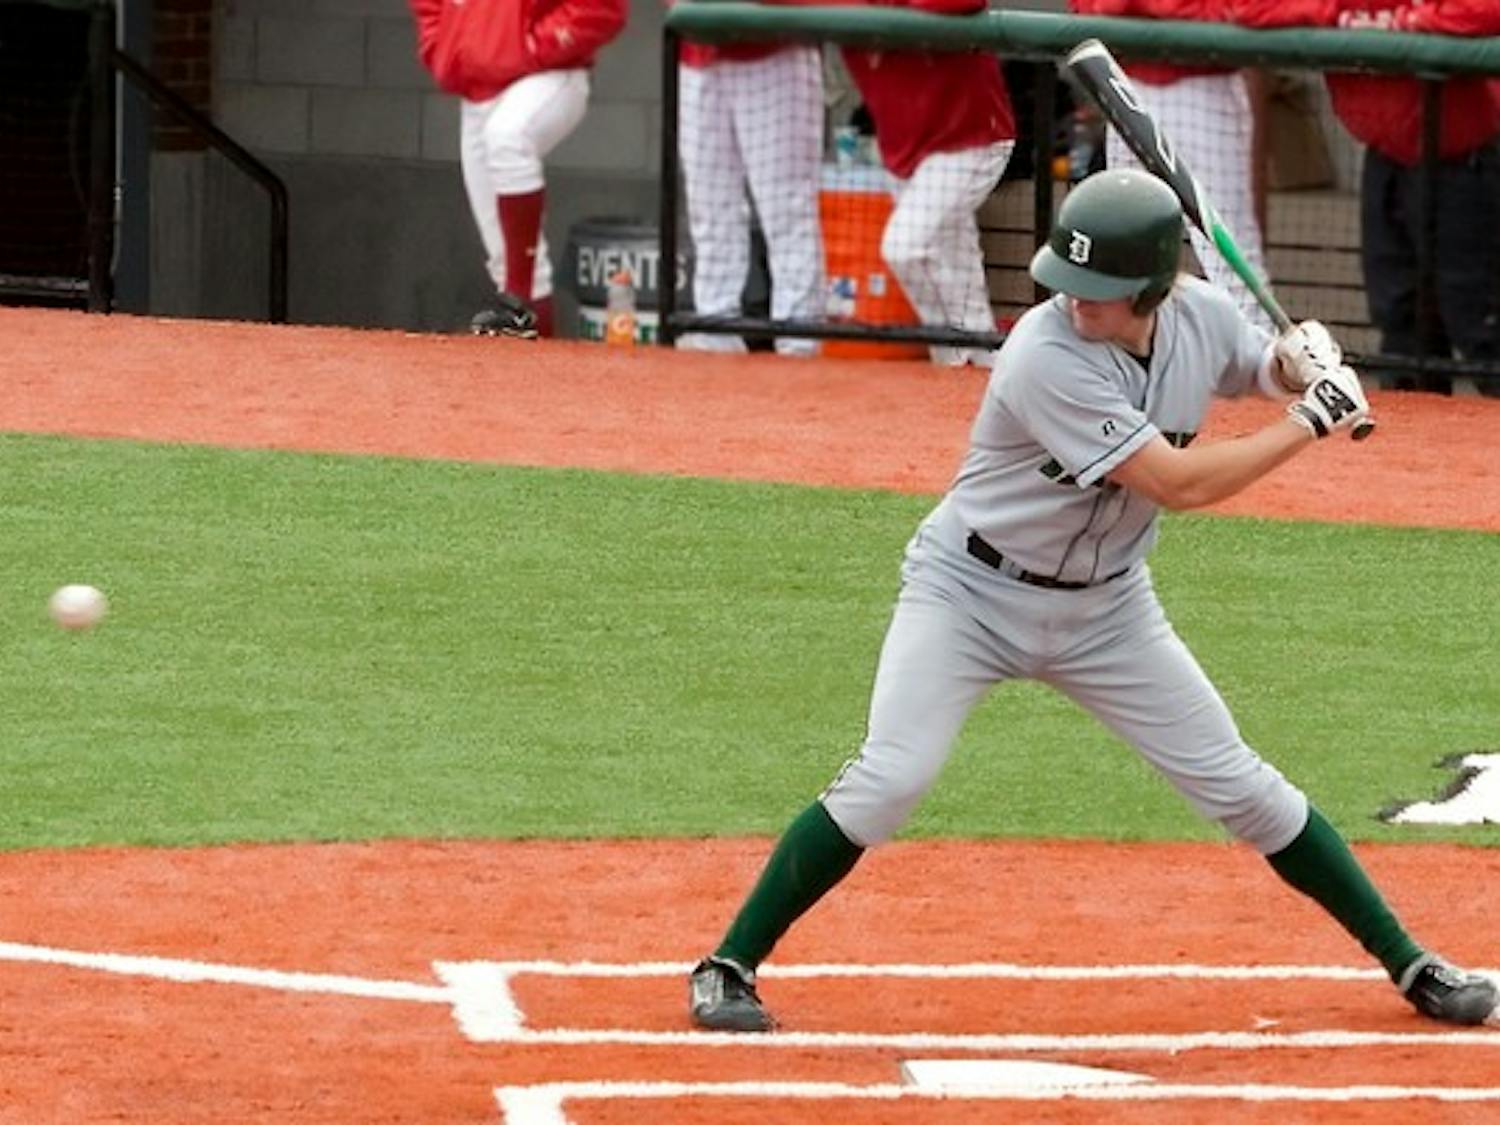 Big Green starting pitcher Colin Britton '11 pitched six innings in Dartmouth's 13-3 win over UVM on Tuesday.